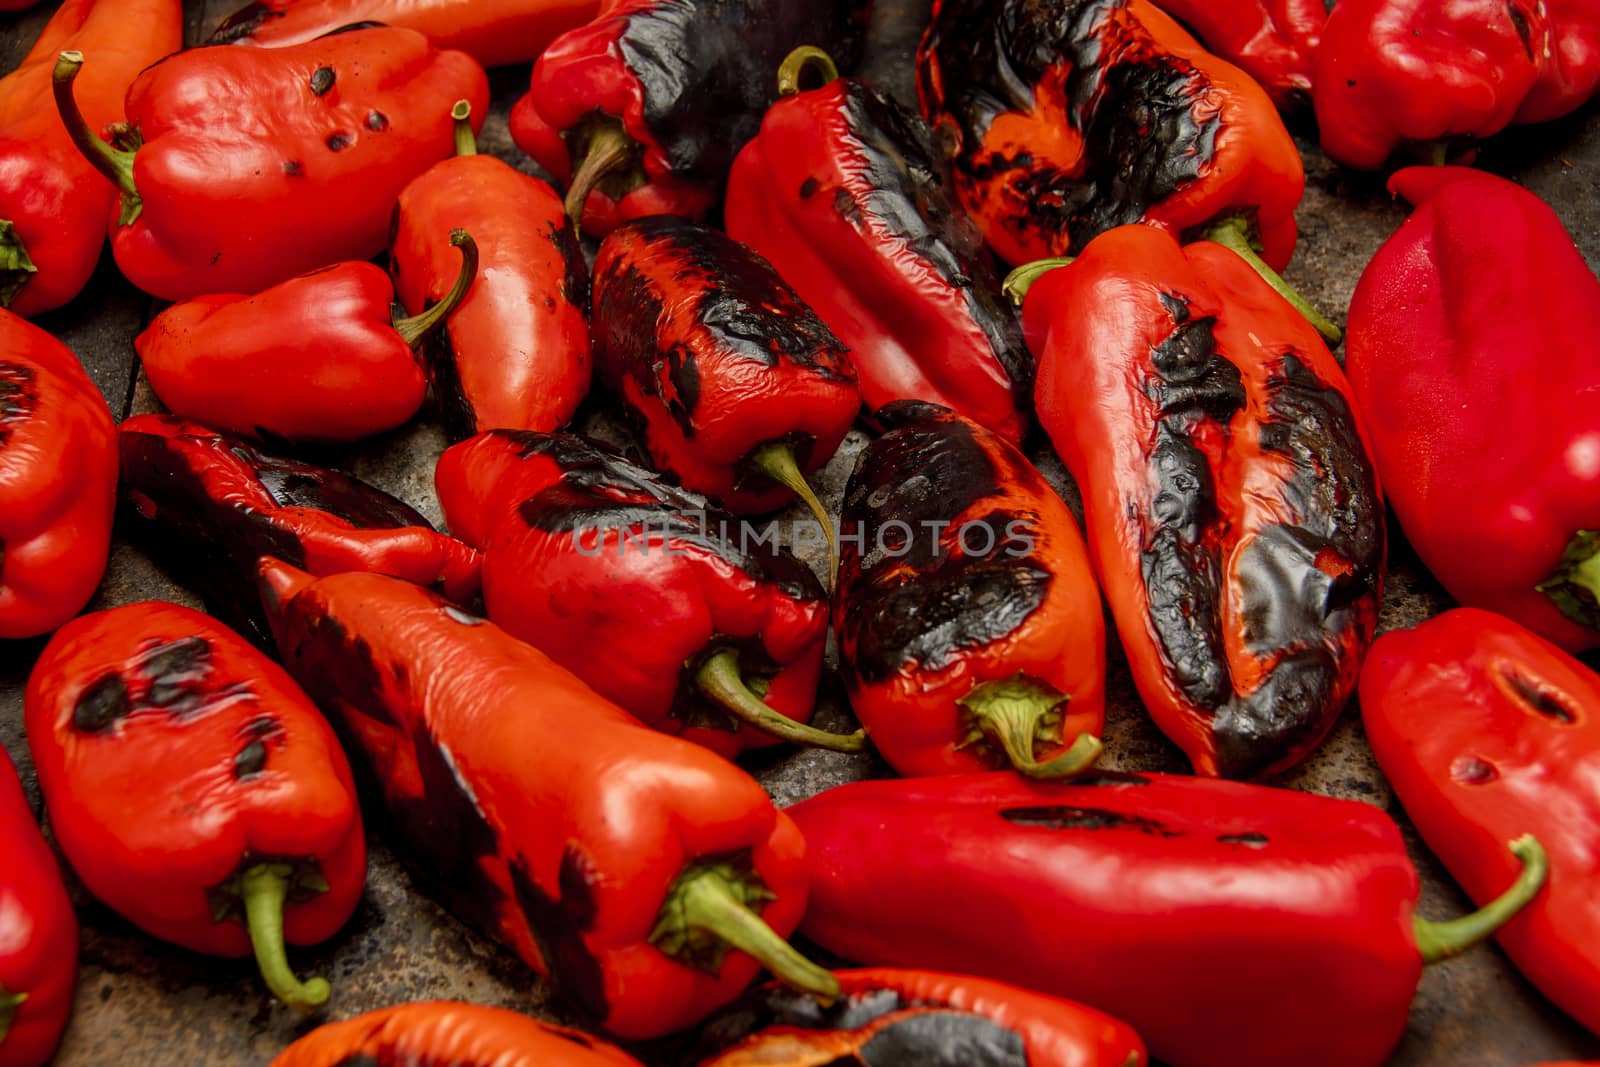 Several red peppers roasting on the stove to be turned into ajvar, a tasty spread popular in the Balkans.